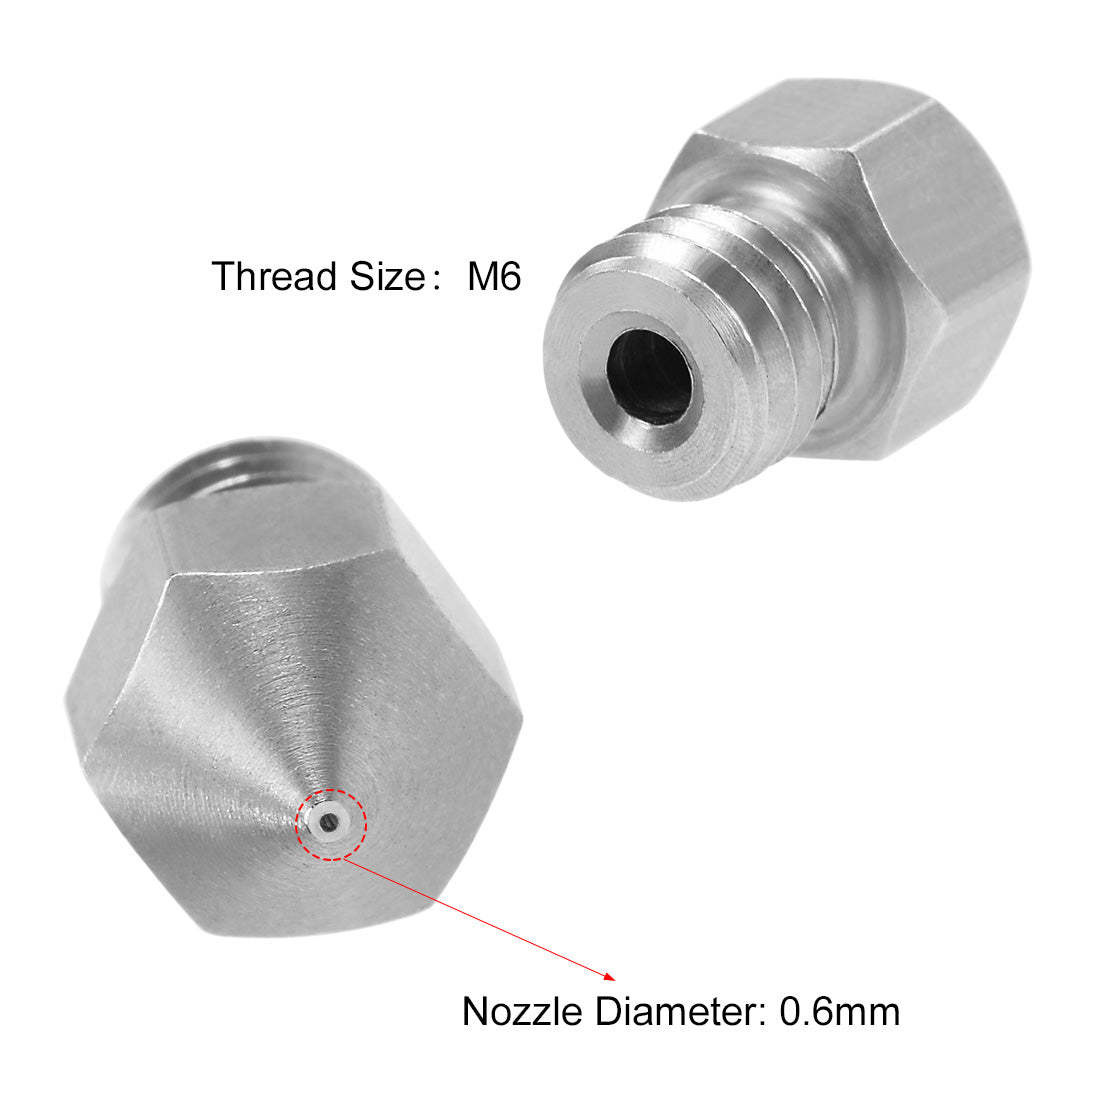 uxcell Uxcell 0.6mm 3D Printer Nozzles Head M6 Thread Replacement for MK8 1.75mm Extruder Print, Stainless Steel 5pcs